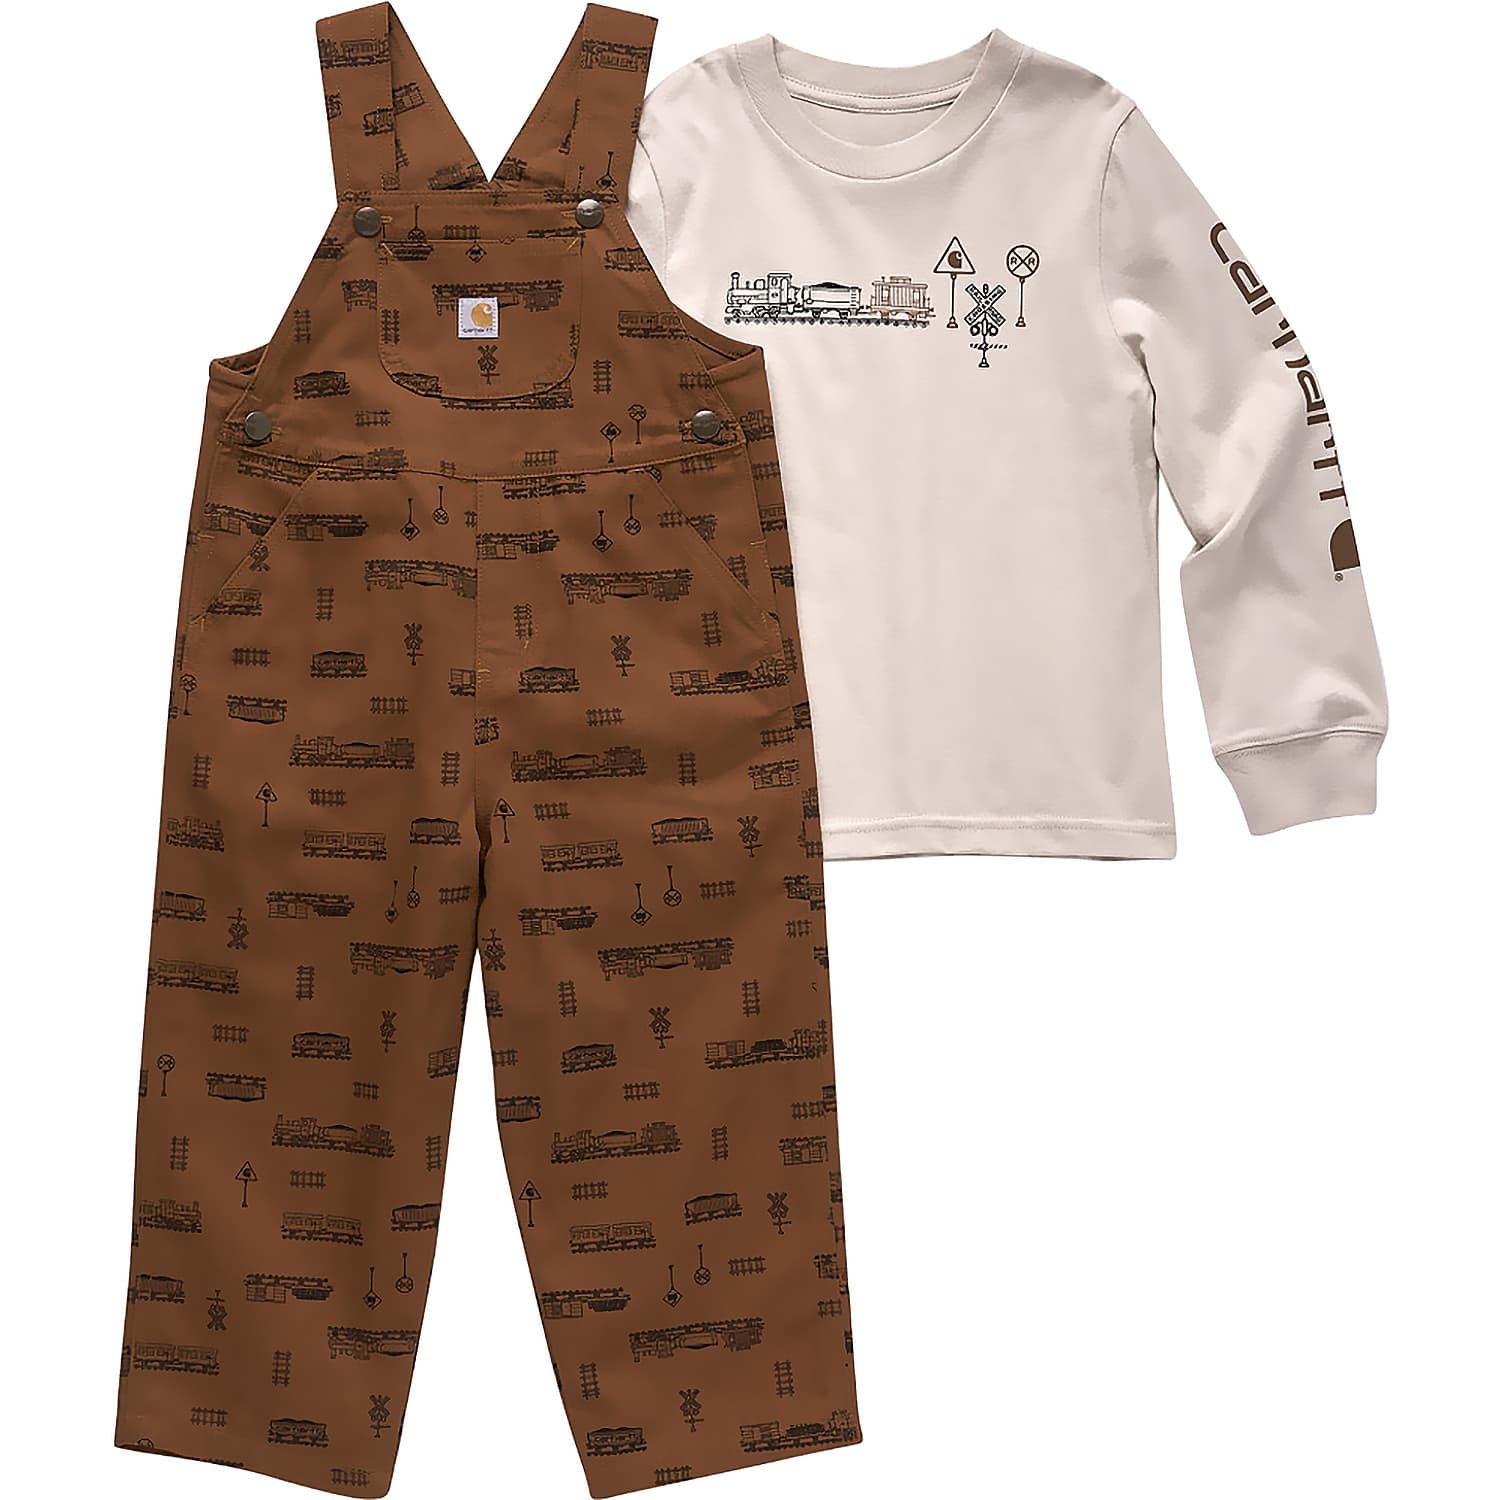 Carhartt® Toddler Boys’ Long-Sleeve T-Shirt And Canvas Print Overall Set